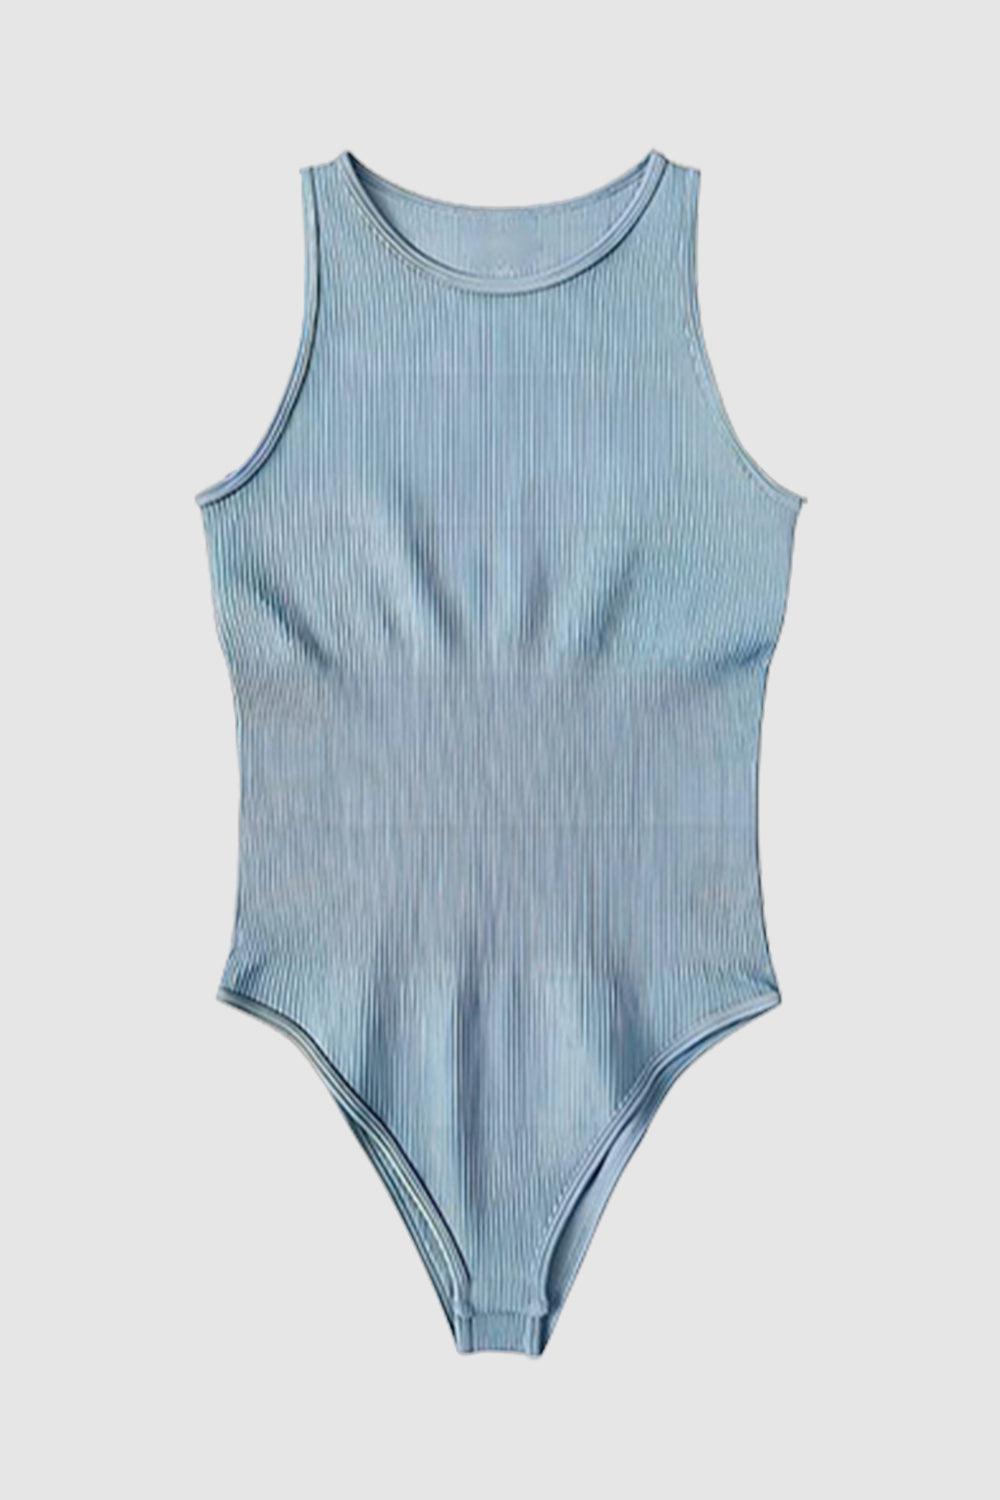 a baby blue bodysuit with a ribbing pattern